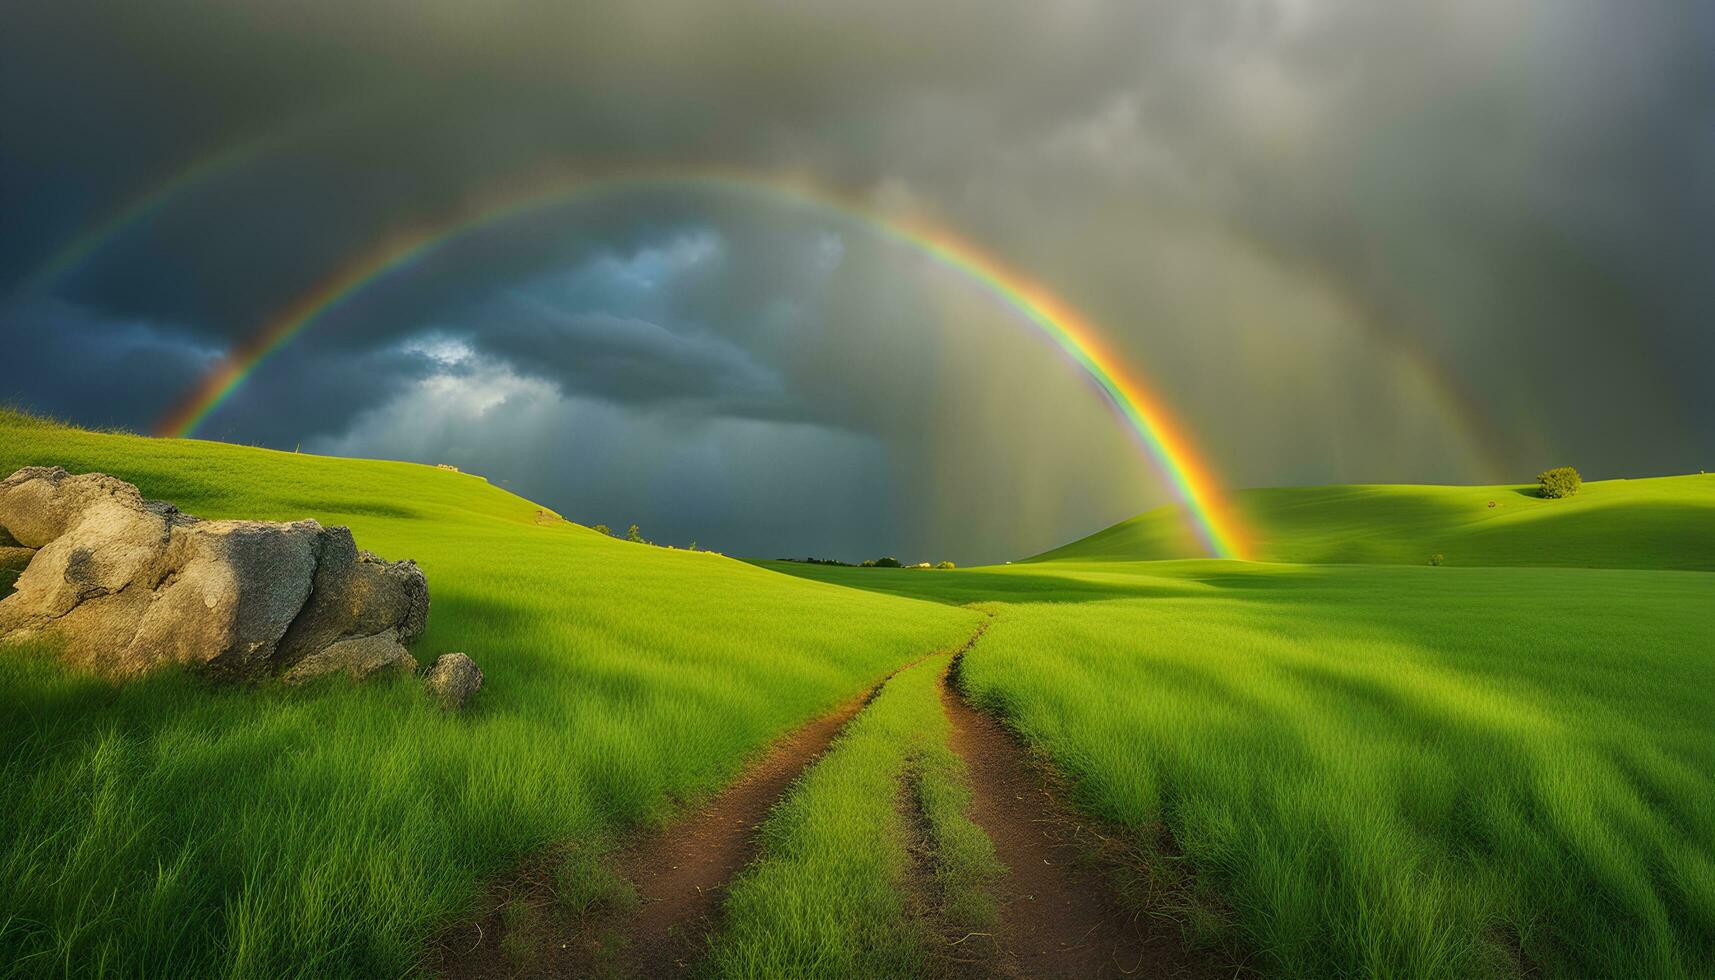 AI generated a rainbow is seen over a green field with a dirt road photo